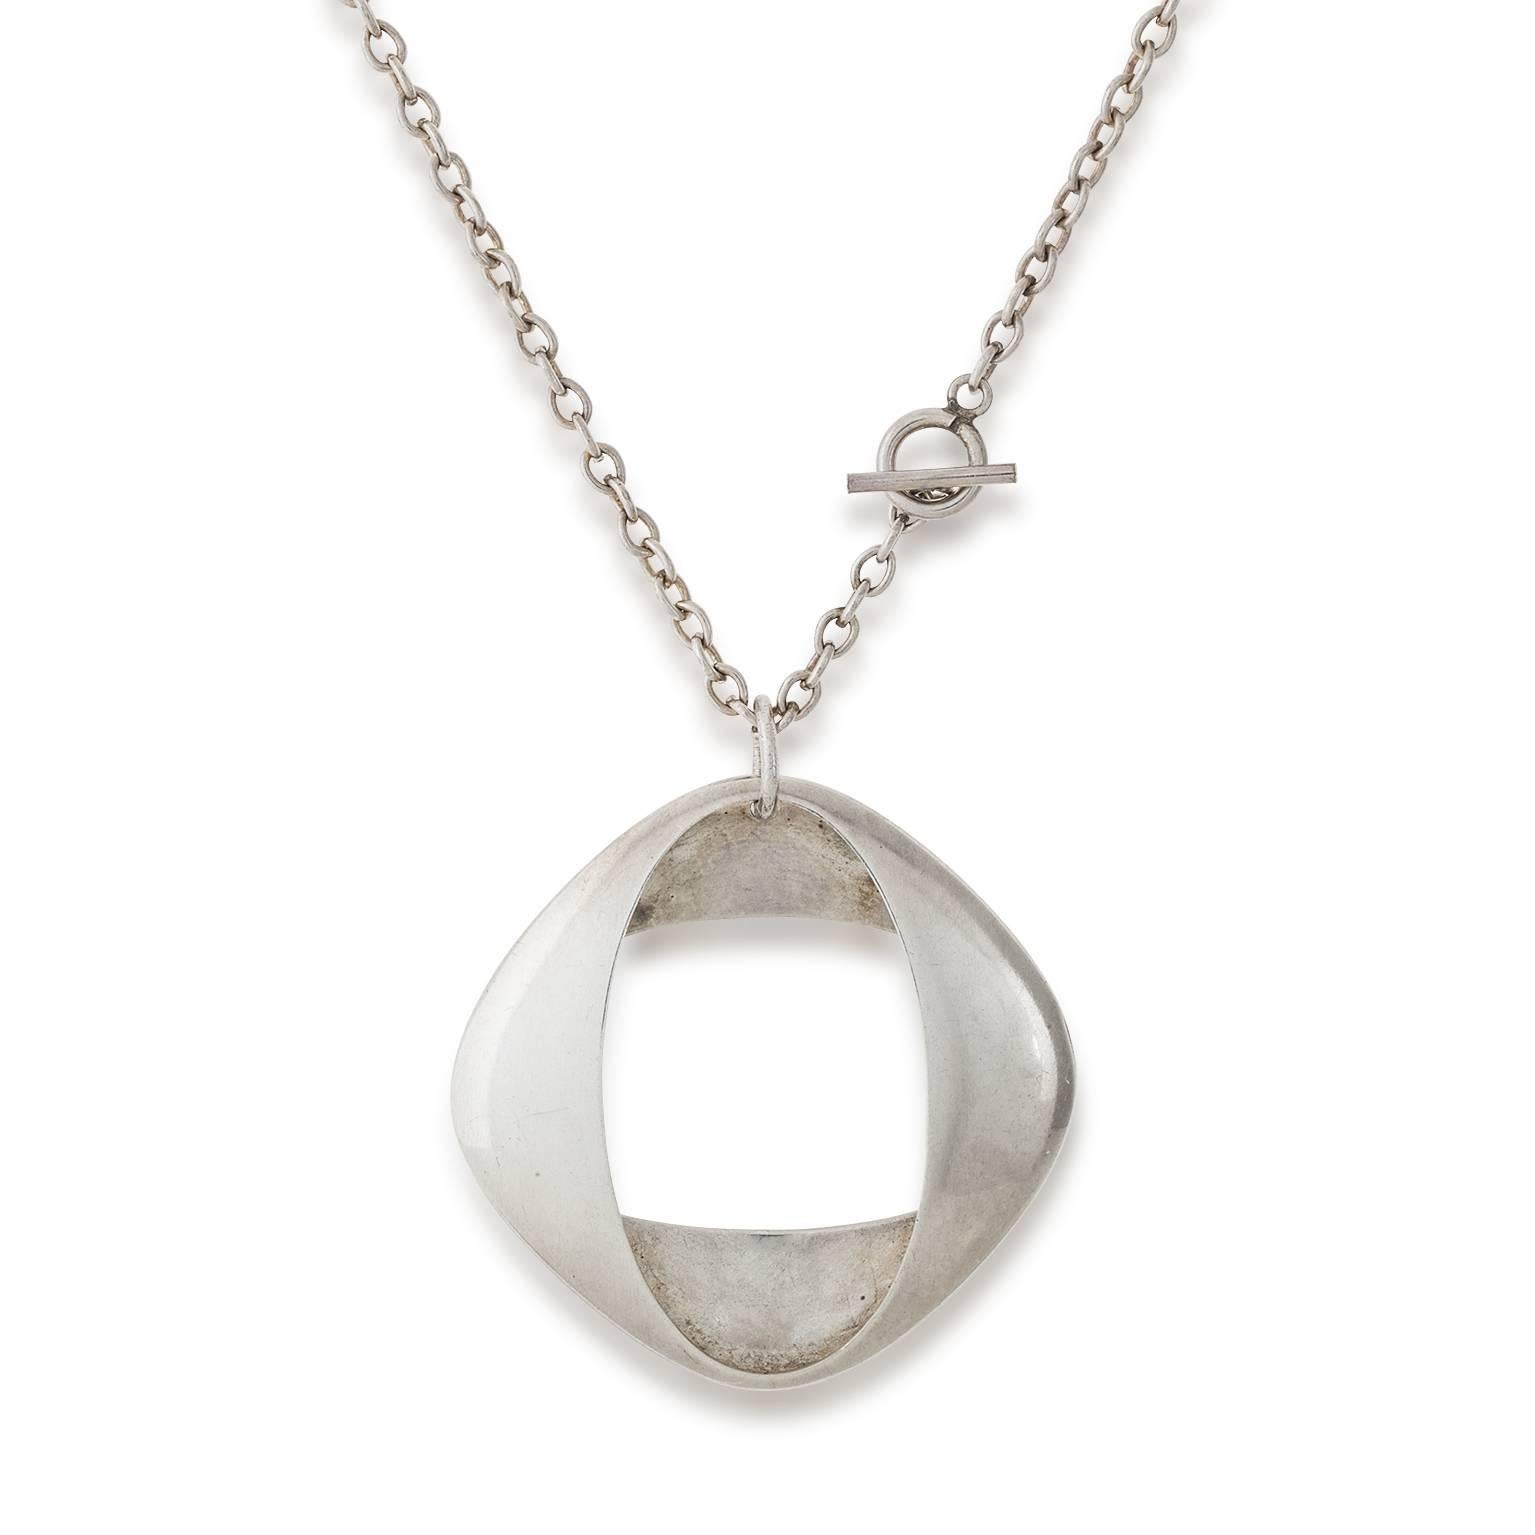 This Henning Koppel Designed Pendant necklace for the Georg Jensen Studio in Denmark is simple in design and a timeless piece of jewelry to wear for years to come.